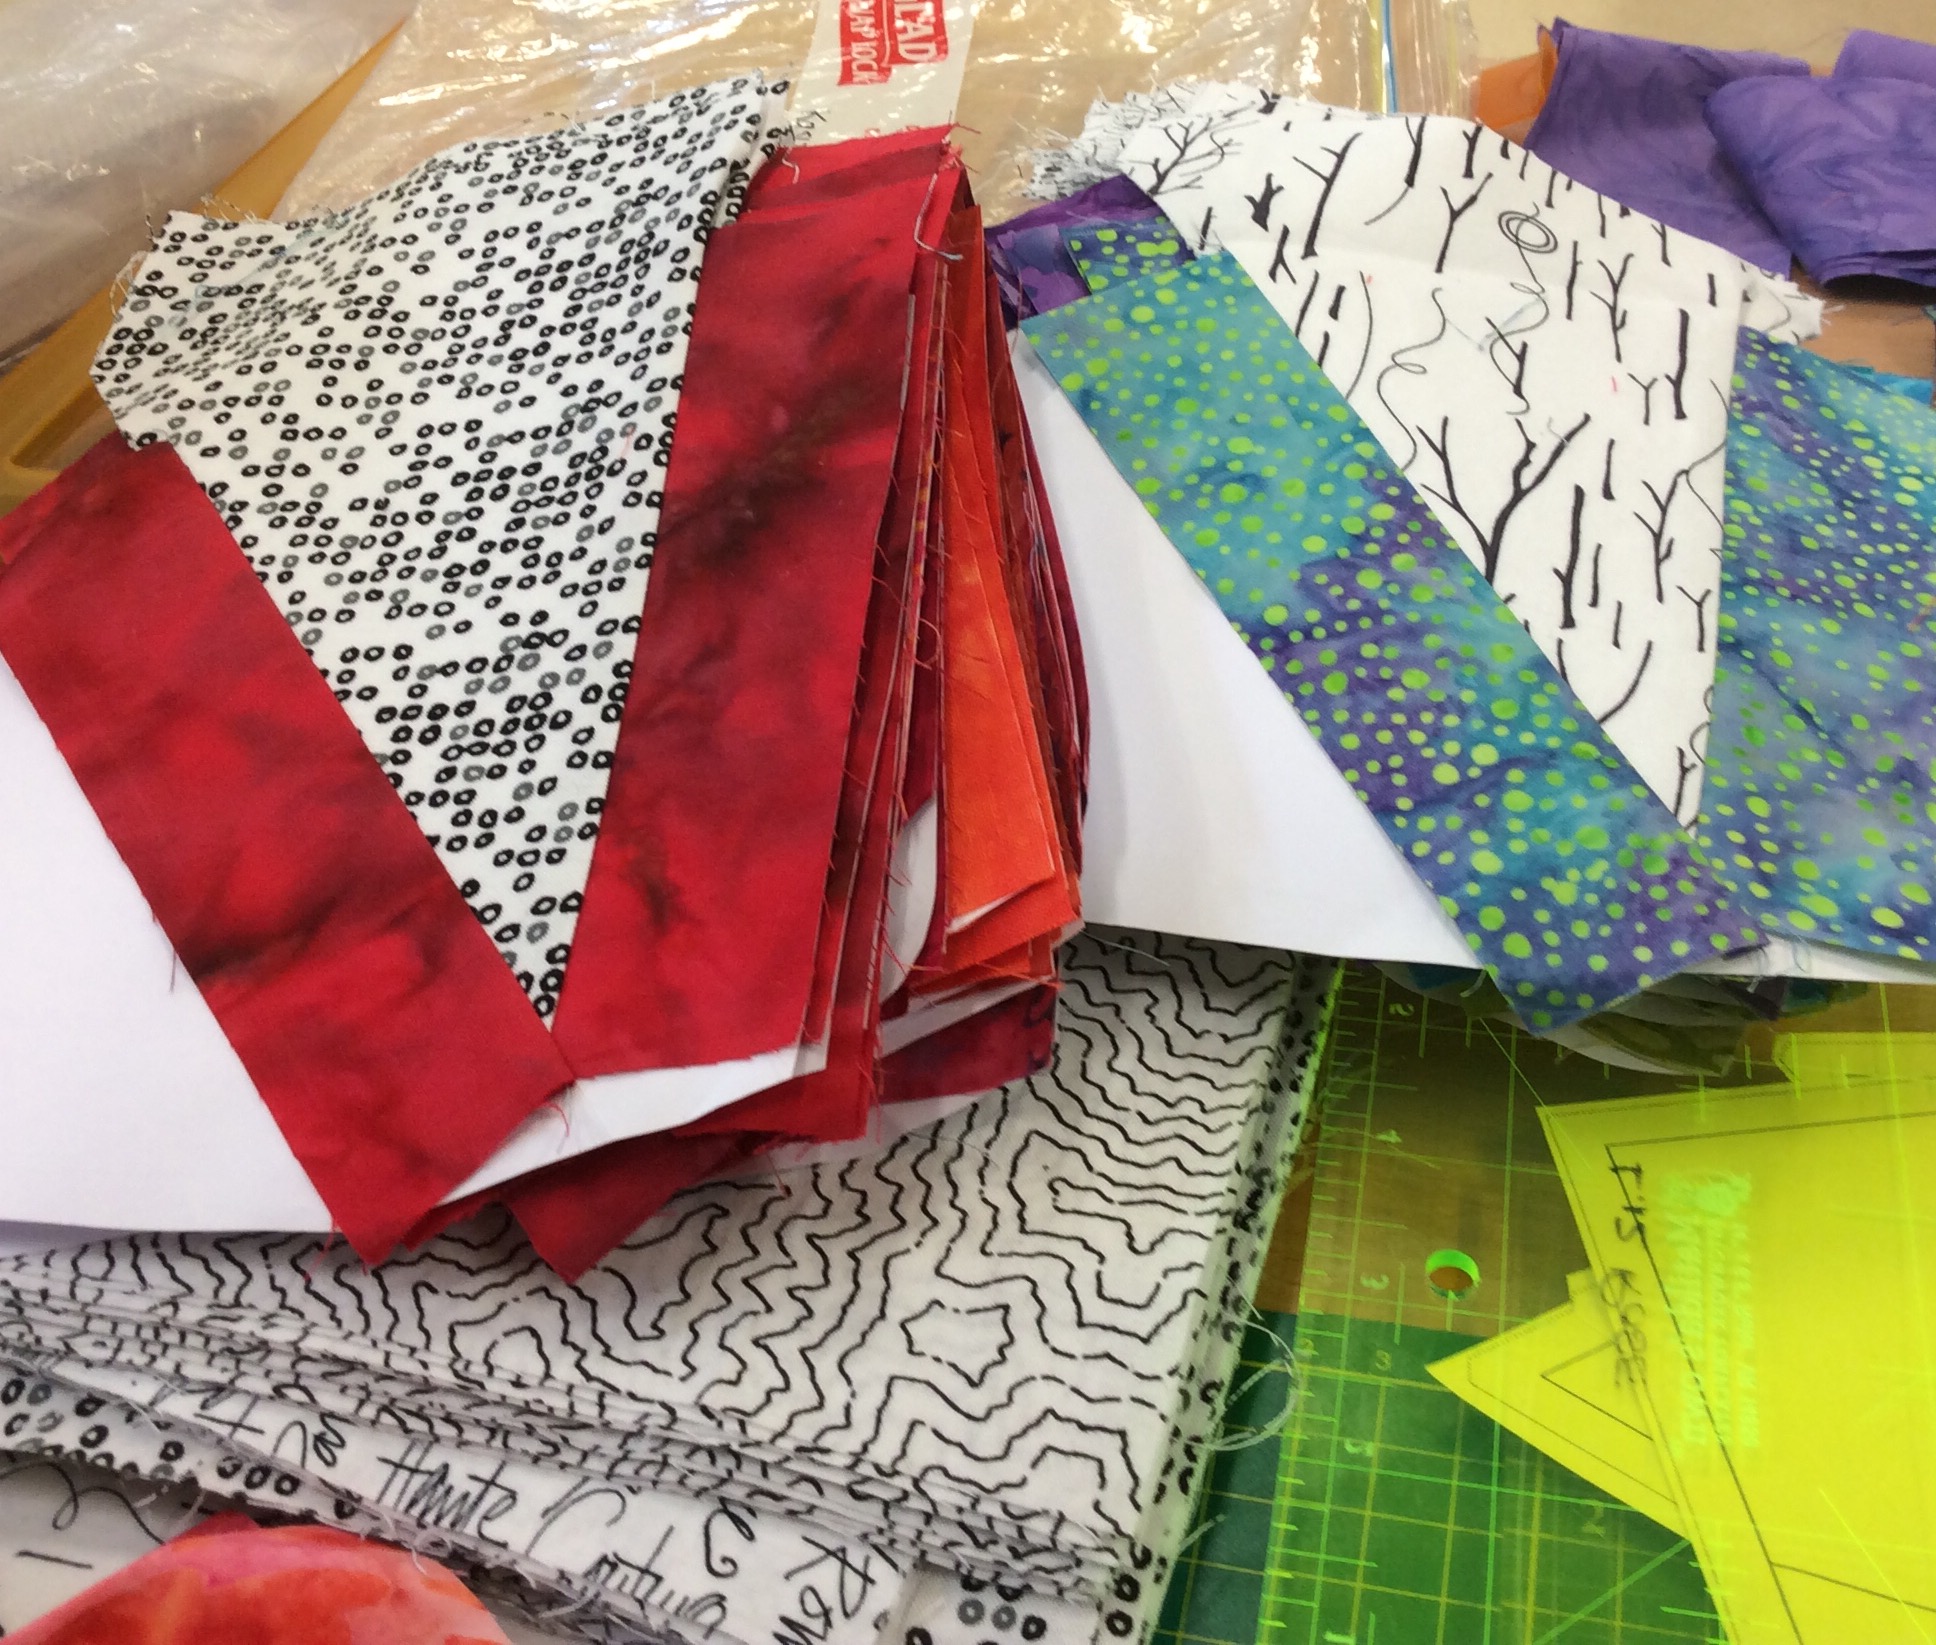 Liz is working on a quilt started in a Michelle Marvig class at AQC in 2016. Foundation pieced - lots to go.